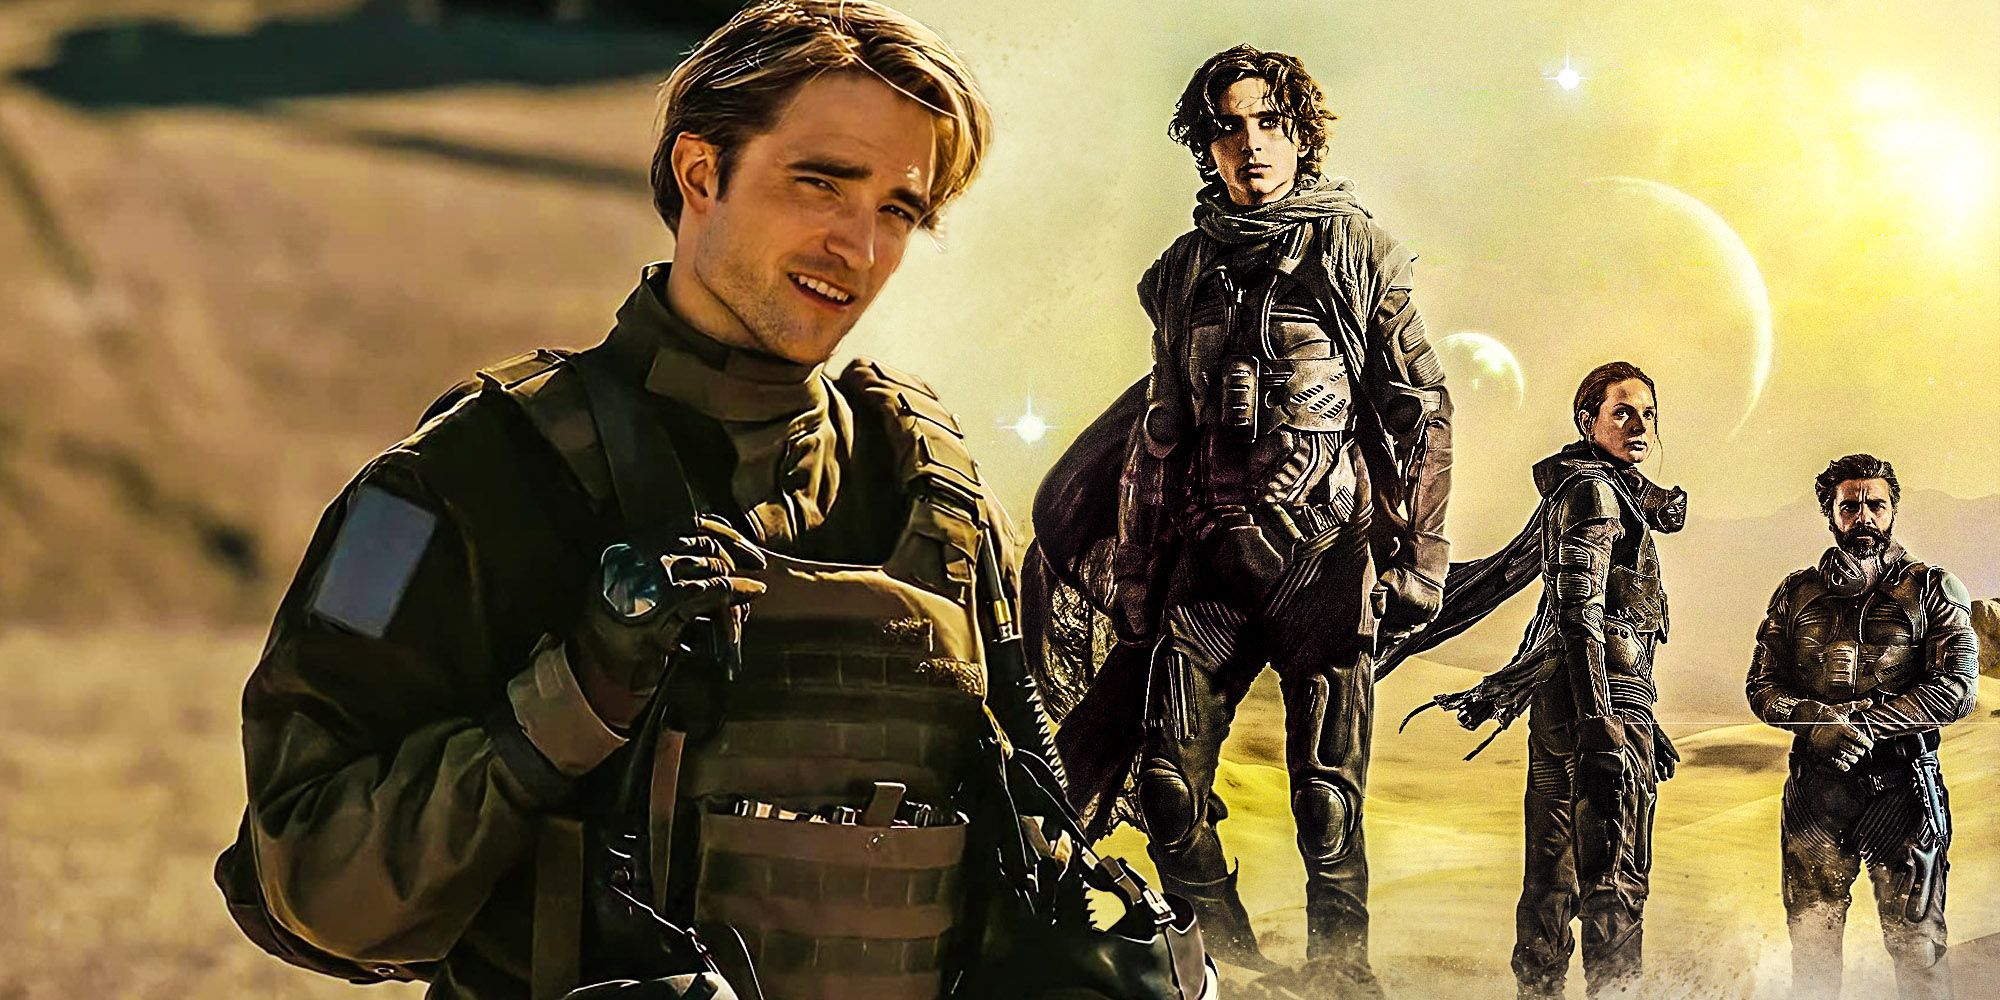 Who will be reprising their roles in the upcoming Dune sequel?